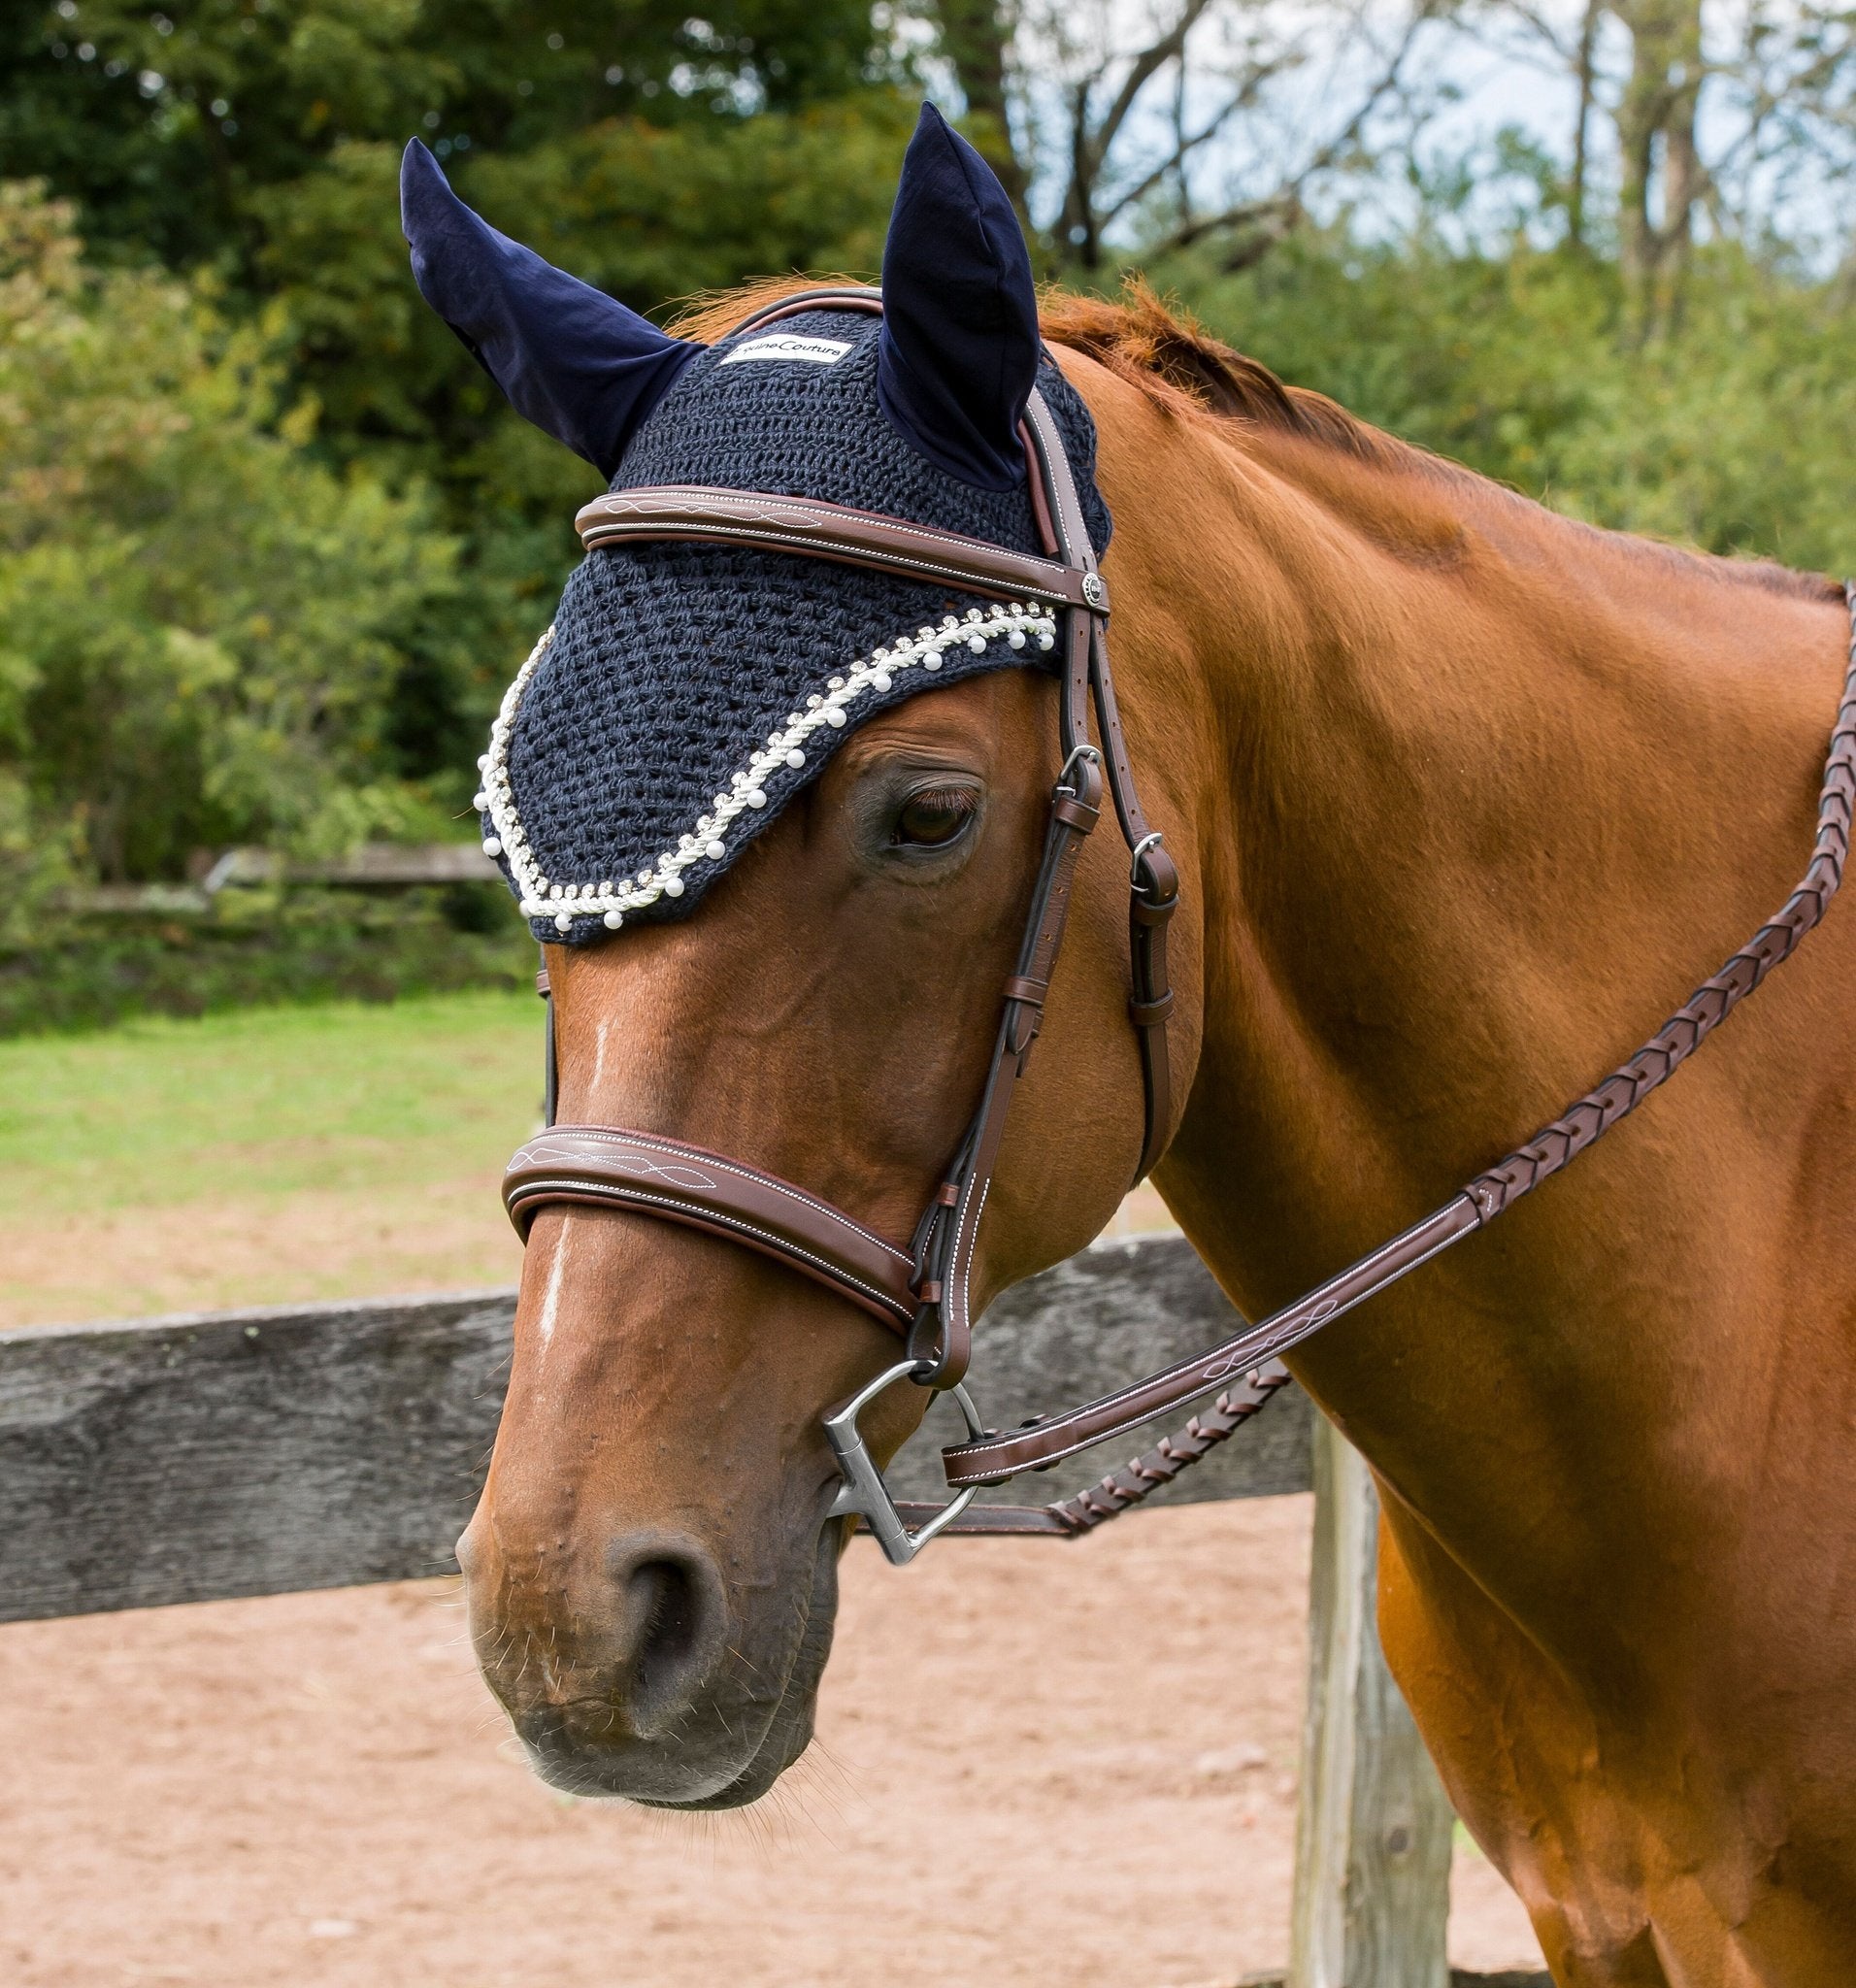 Equine Couture Fly Bonnet with Pearls and Crystals - Breeches.com